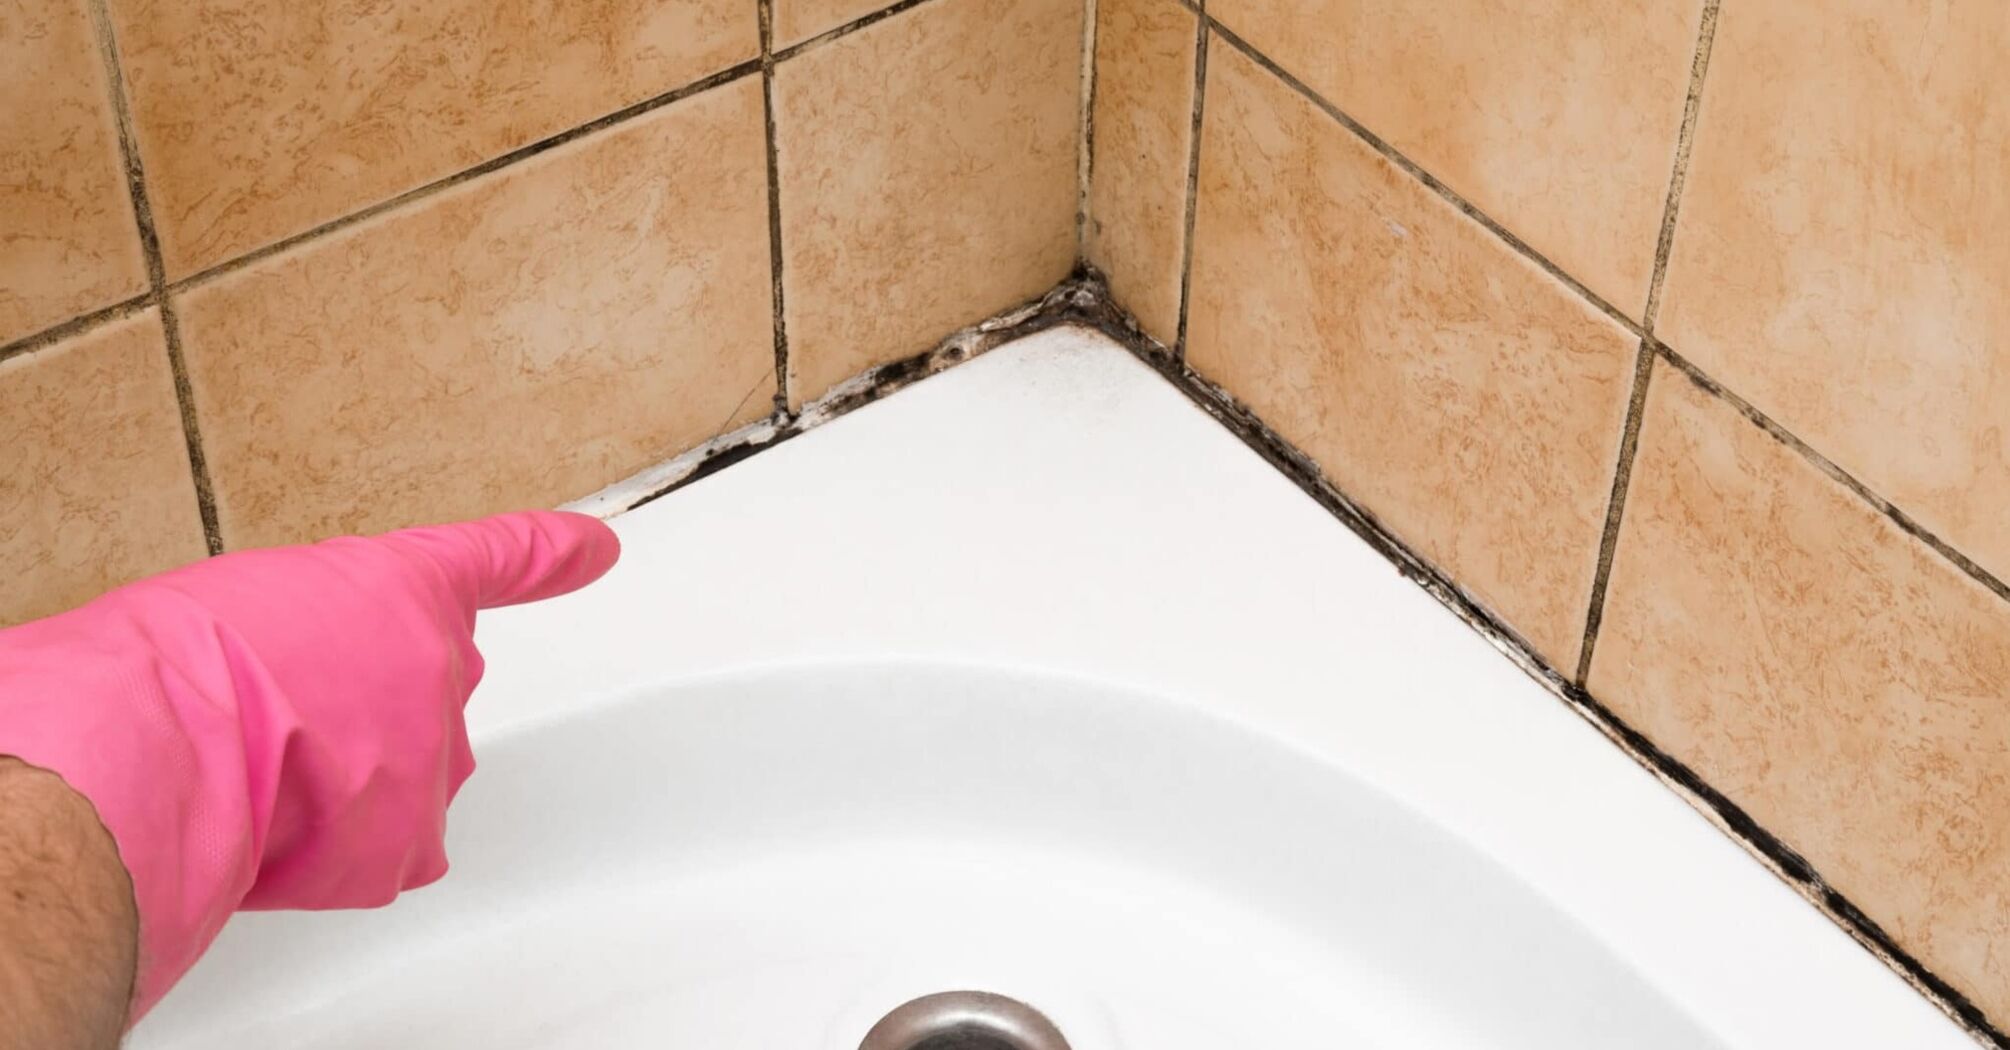 How to get rid of mold in the bathroom